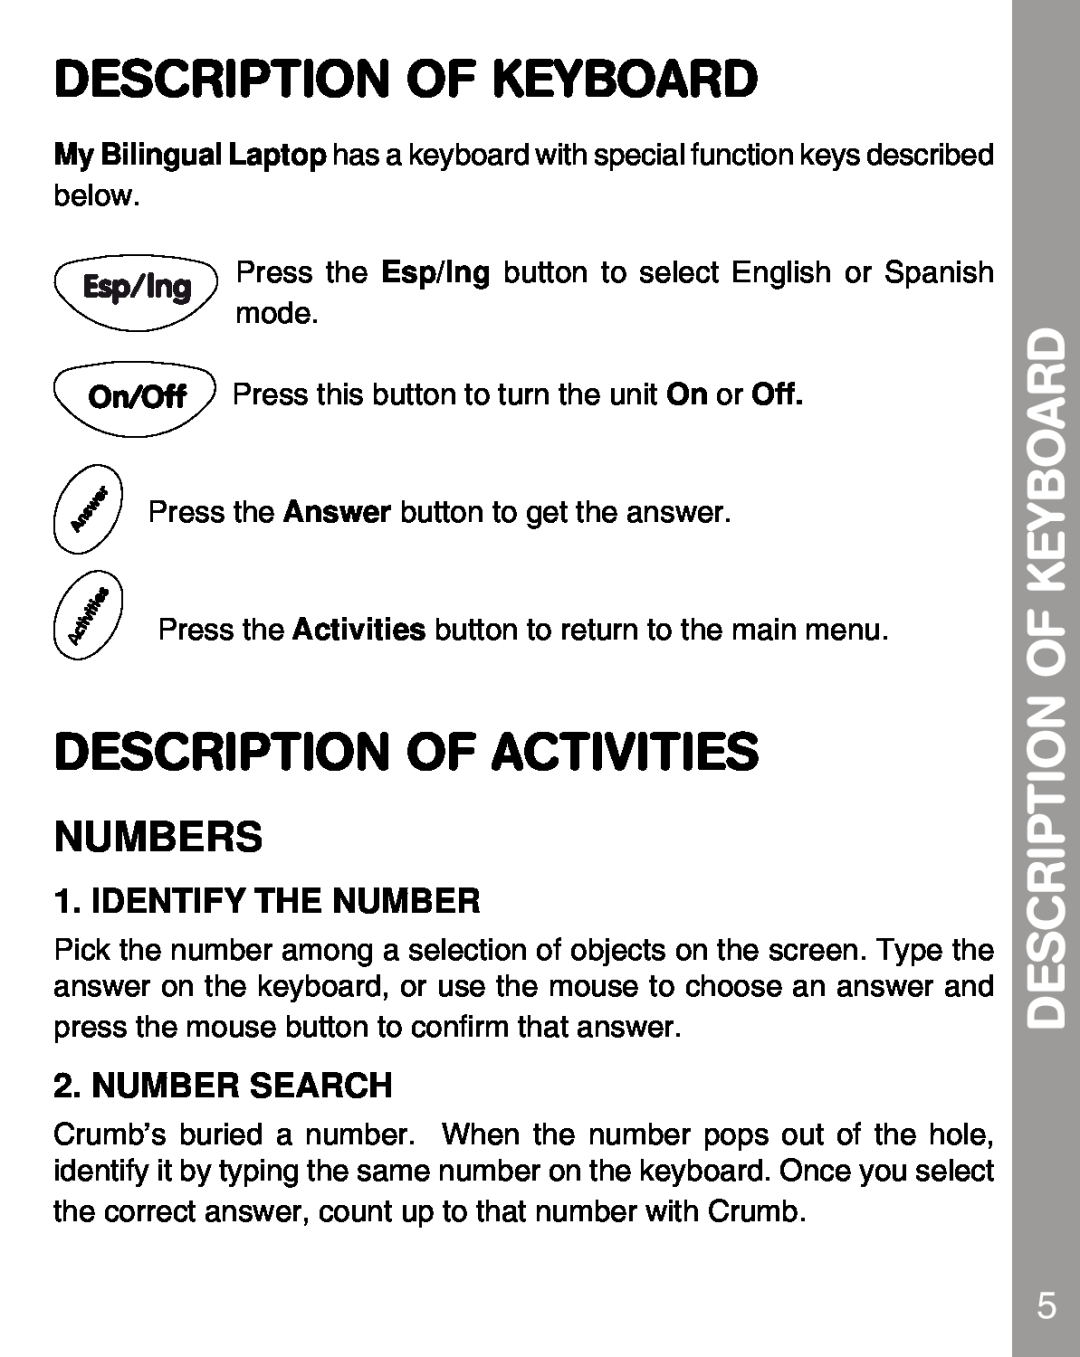 VTech 80-067848 user manual Description Of Keyboard, Description Of Activities, Numbers, Identify The Number, Number Search 